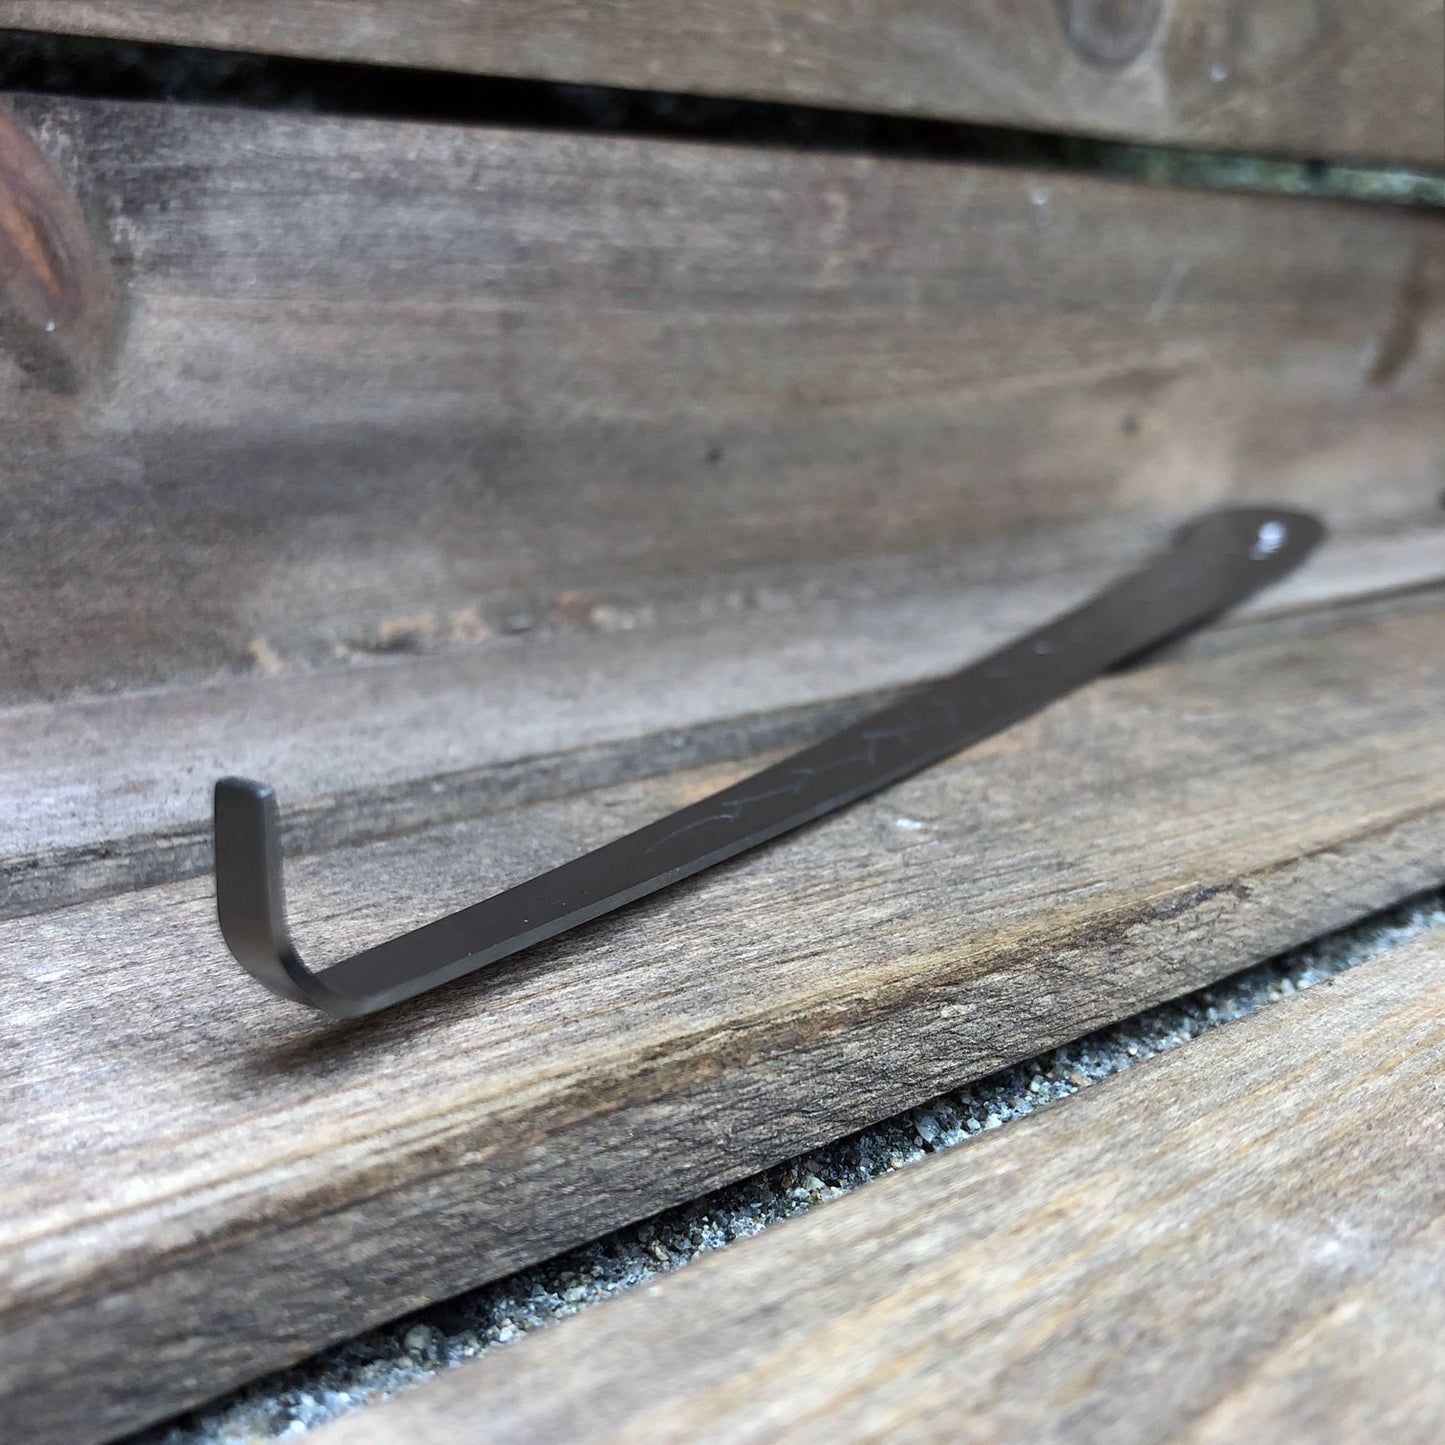 Stainless steel, smokeless candle wick dipper against a weathered wooden crate.